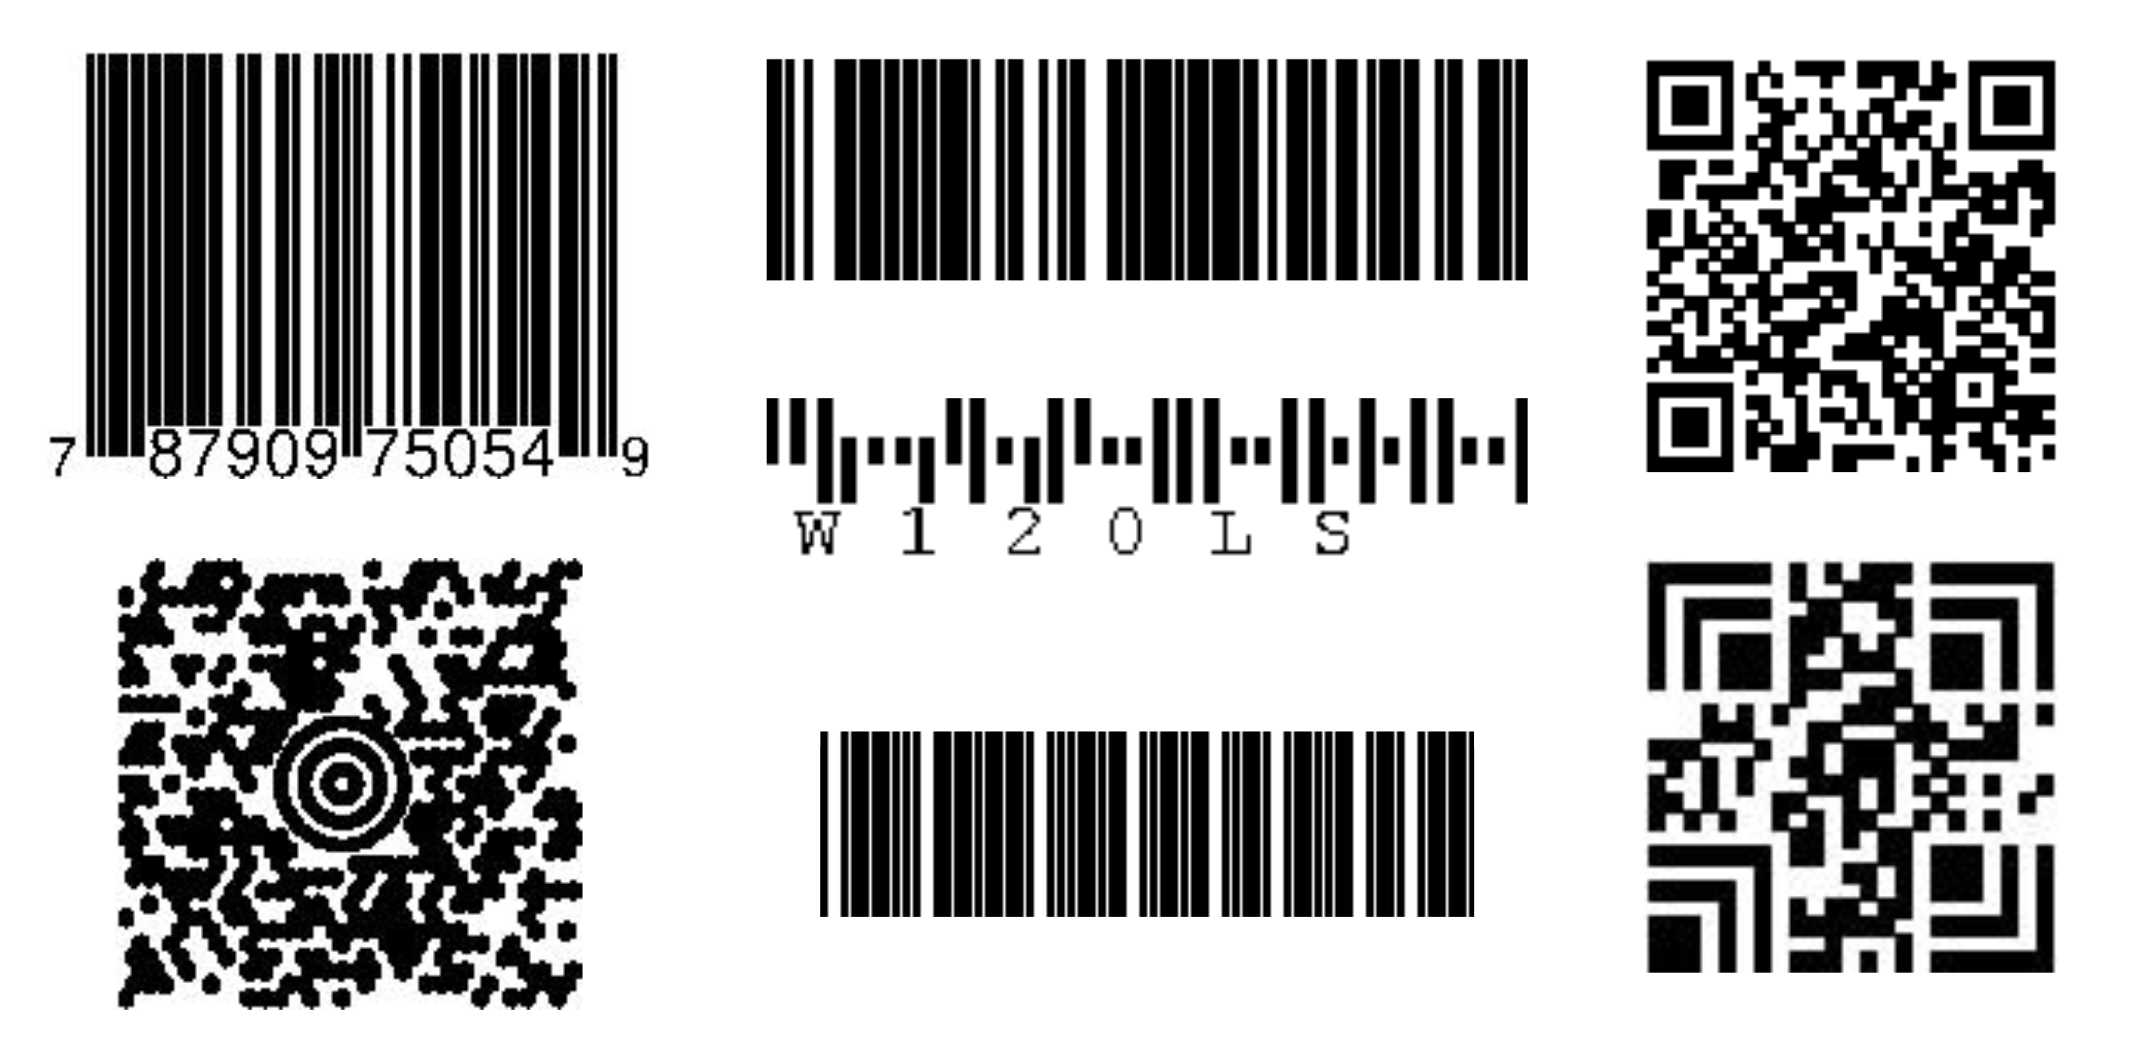 A selection of barcodes generated with treepoem, using symbologies from the common to the obscure. Columnwise starting in top left: UPC-A, Maxicode, Code 128, Royal Mail 4 State Customer Code, QR Code, Italian Pharmacode, Aztec Code.